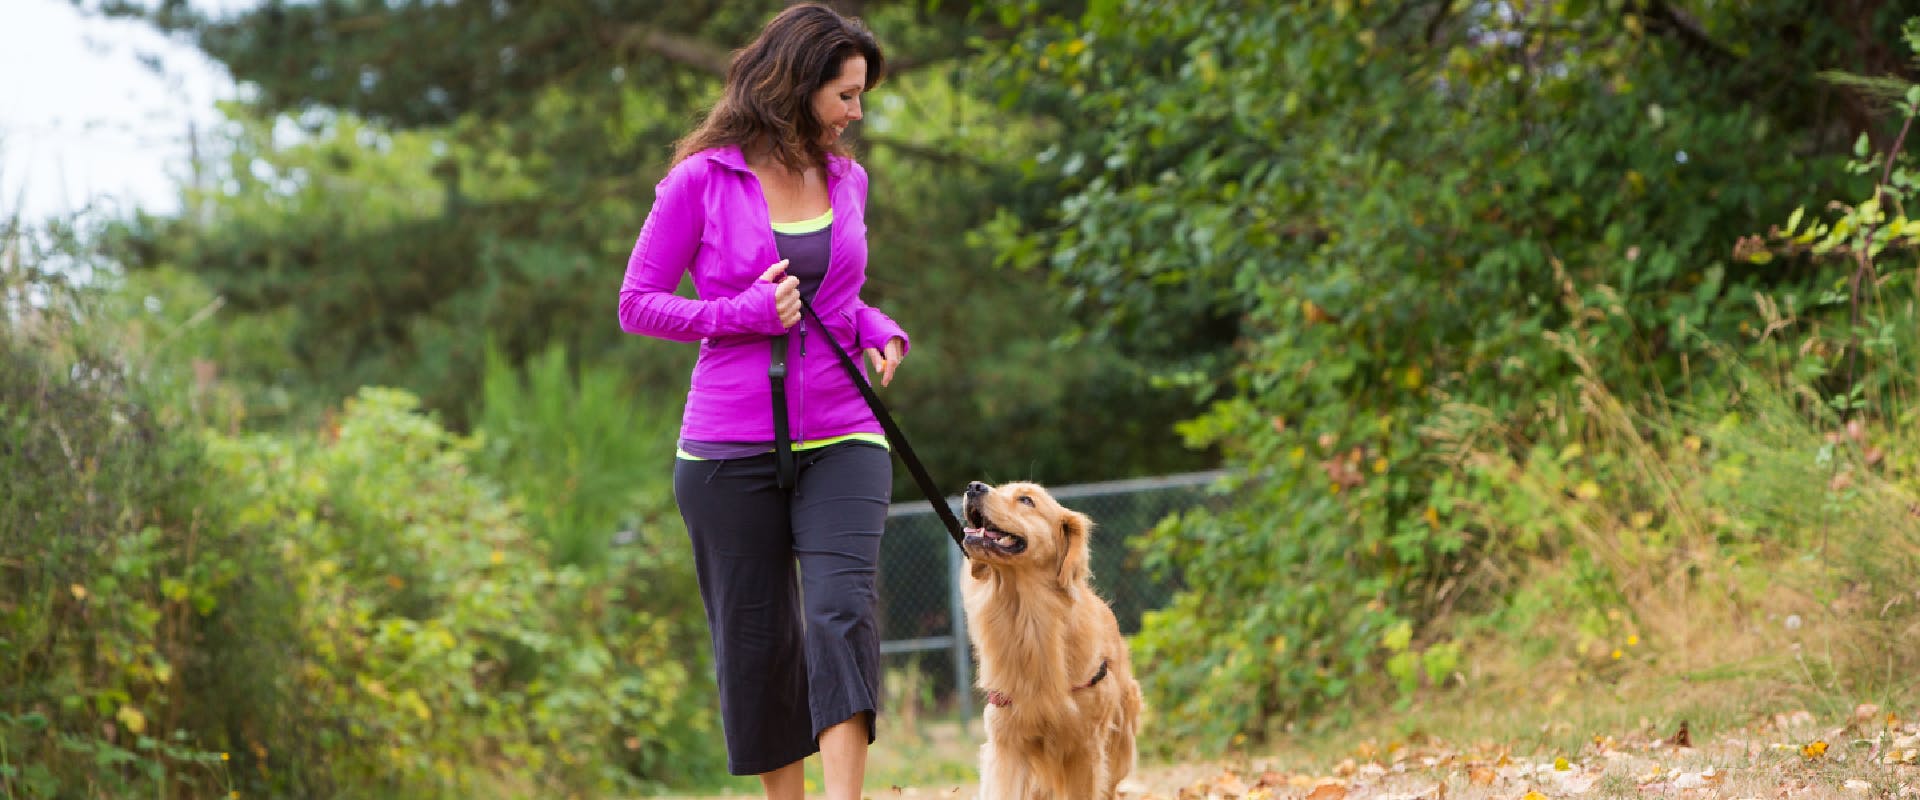 Walking the dog is one of many health benefits of owning a dog.